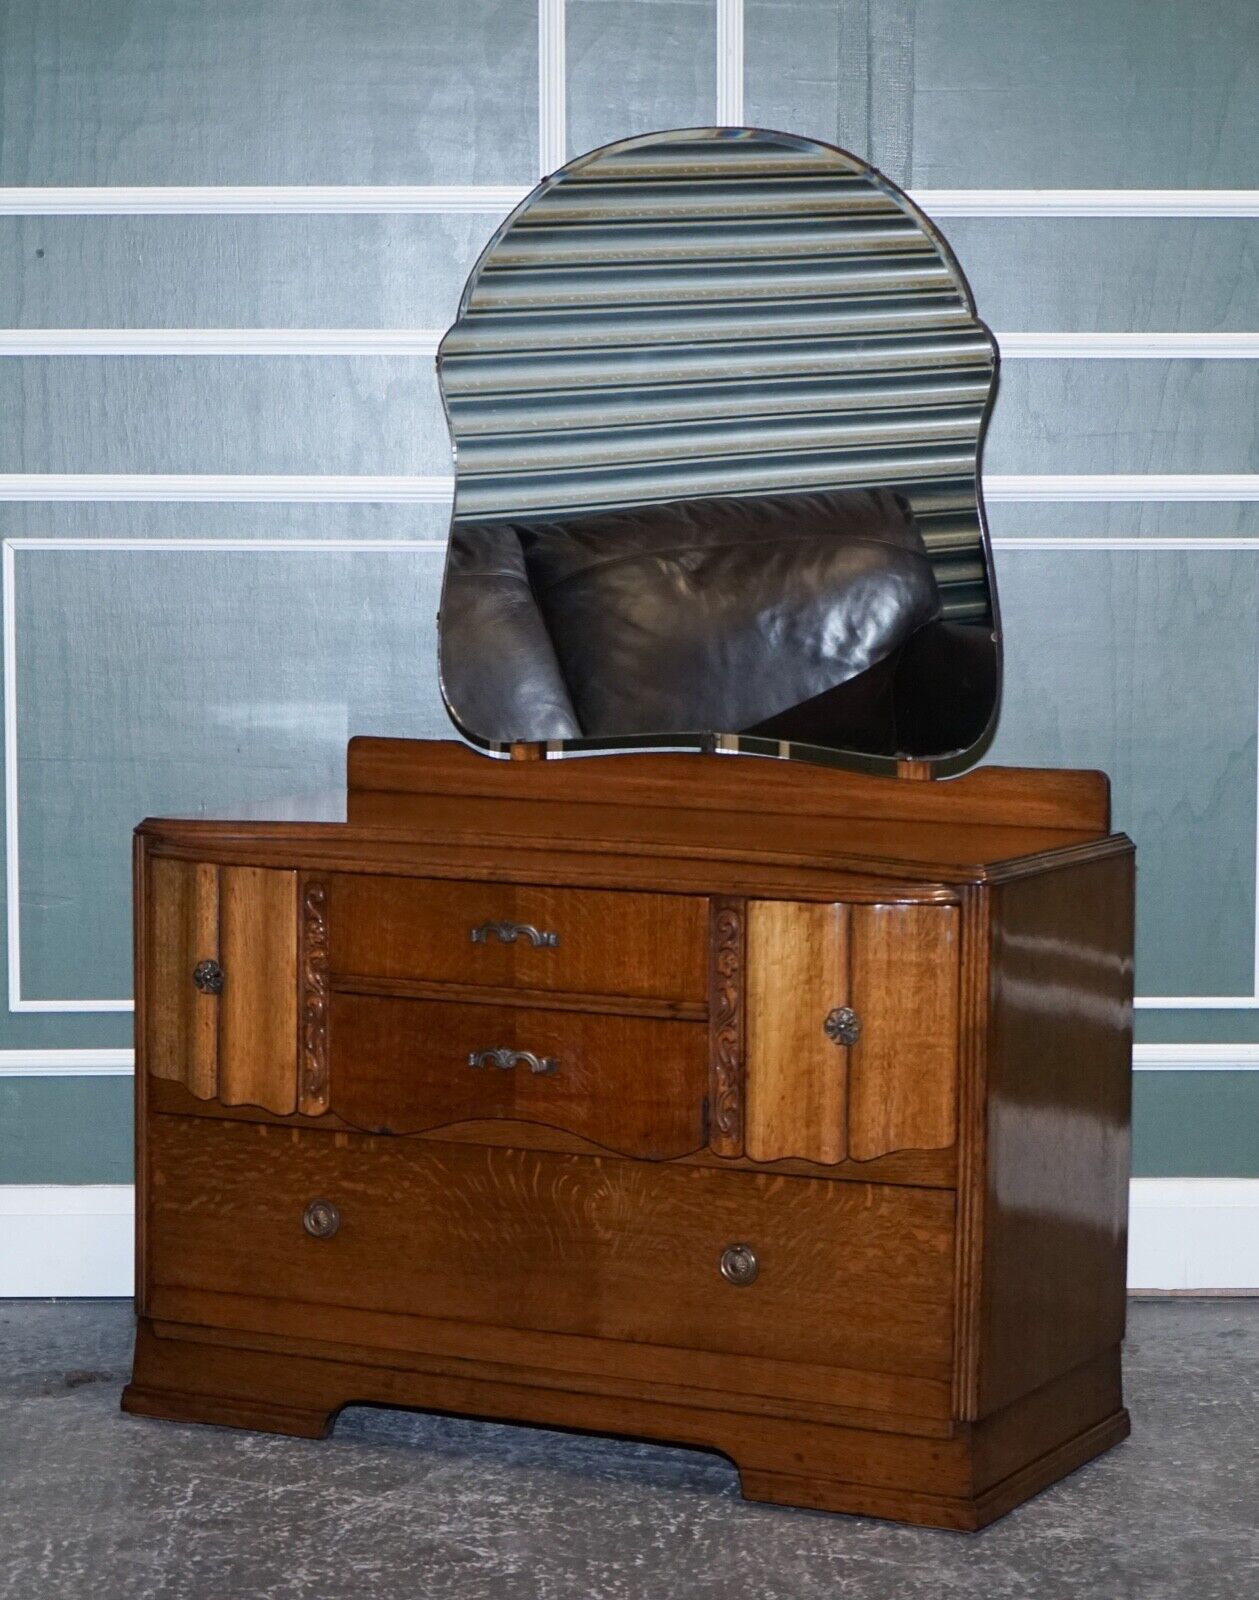 LOVELY VINTAGE ART DECO HAND CARVED OAK DRESSING TABLE WITH MIRROR